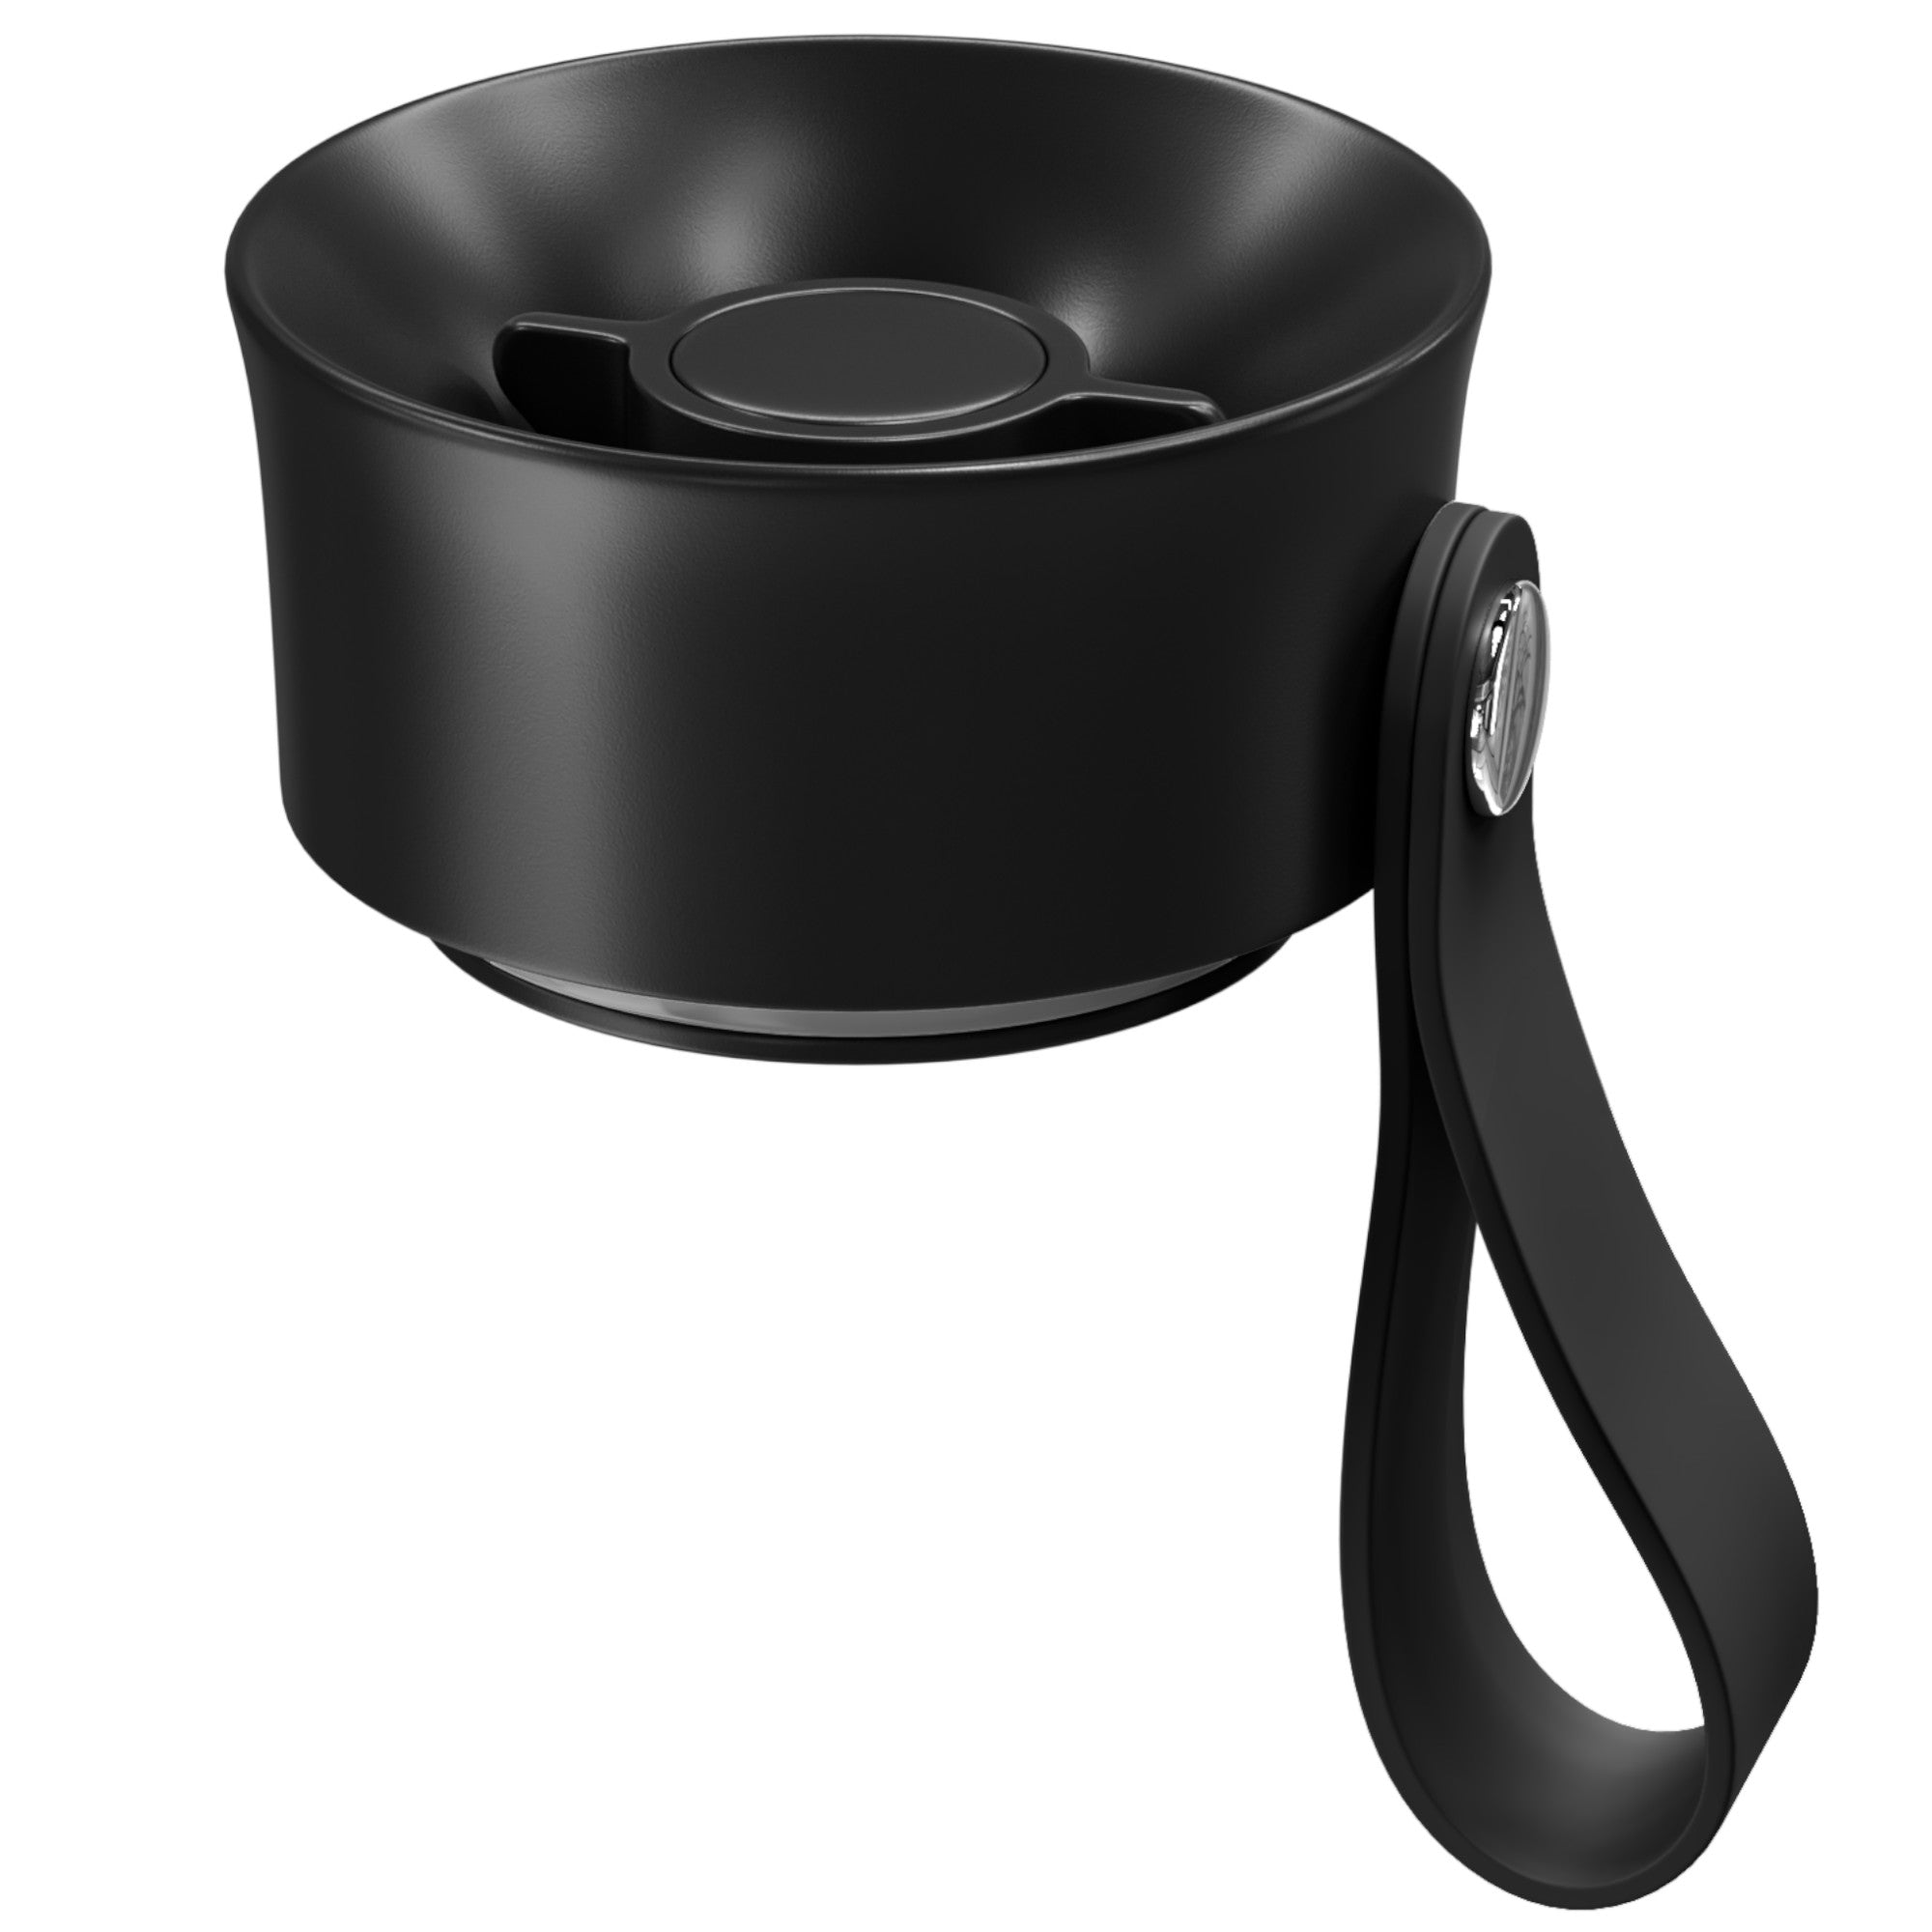 360 Coffee2Go Lid for ACTIVE FLASK